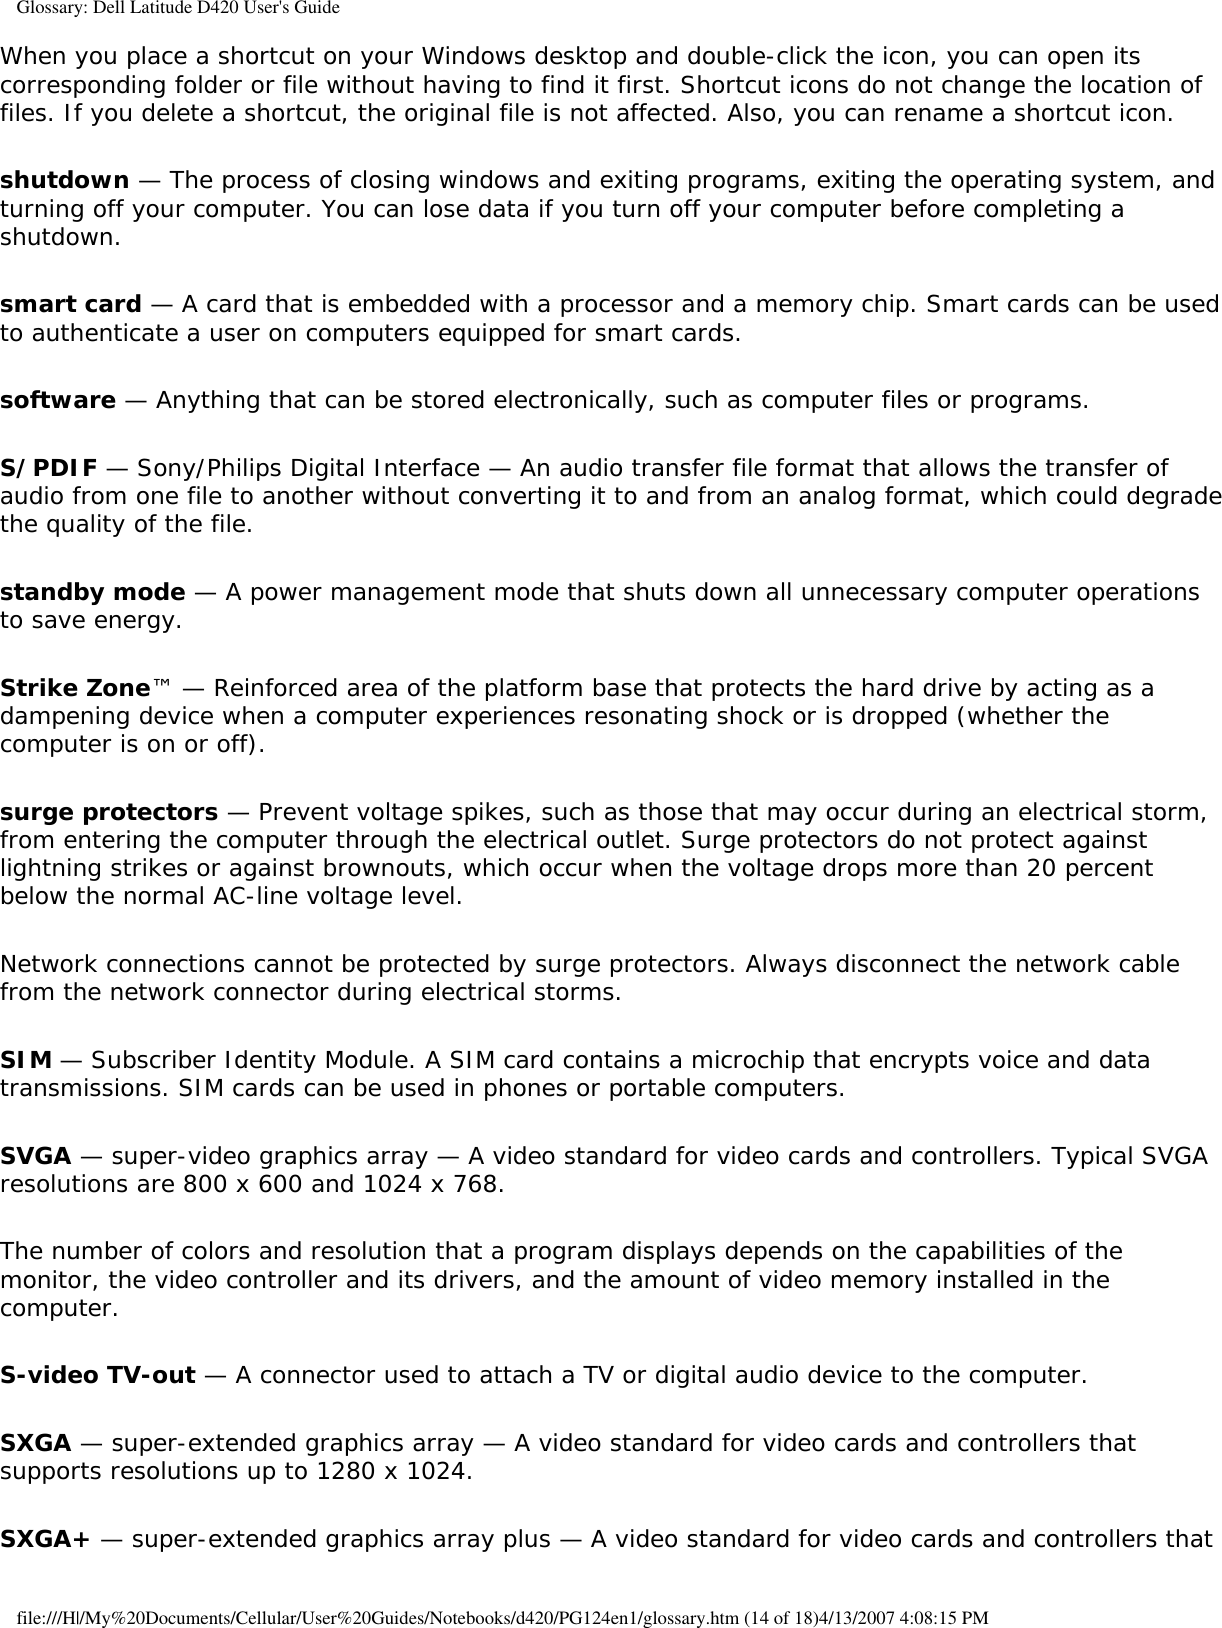 Glossary: Dell Latitude D420 User&apos;s GuideWhen you place a shortcut on your Windows desktop and double-click the icon, you can open its corresponding folder or file without having to find it first. Shortcut icons do not change the location of files. If you delete a shortcut, the original file is not affected. Also, you can rename a shortcut icon.shutdown — The process of closing windows and exiting programs, exiting the operating system, and turning off your computer. You can lose data if you turn off your computer before completing a shutdown.smart card — A card that is embedded with a processor and a memory chip. Smart cards can be used to authenticate a user on computers equipped for smart cards.software — Anything that can be stored electronically, such as computer files or programs.S/PDIF — Sony/Philips Digital Interface — An audio transfer file format that allows the transfer of audio from one file to another without converting it to and from an analog format, which could degrade the quality of the file.standby mode — A power management mode that shuts down all unnecessary computer operations to save energy.Strike Zone™ — Reinforced area of the platform base that protects the hard drive by acting as a dampening device when a computer experiences resonating shock or is dropped (whether the computer is on or off).surge protectors — Prevent voltage spikes, such as those that may occur during an electrical storm, from entering the computer through the electrical outlet. Surge protectors do not protect against lightning strikes or against brownouts, which occur when the voltage drops more than 20 percent below the normal AC-line voltage level.Network connections cannot be protected by surge protectors. Always disconnect the network cable from the network connector during electrical storms.SIM — Subscriber Identity Module. A SIM card contains a microchip that encrypts voice and data transmissions. SIM cards can be used in phones or portable computers.SVGA — super-video graphics array — A video standard for video cards and controllers. Typical SVGA resolutions are 800 x 600 and 1024 x 768.The number of colors and resolution that a program displays depends on the capabilities of the monitor, the video controller and its drivers, and the amount of video memory installed in the computer.S-video TV-out — A connector used to attach a TV or digital audio device to the computer.SXGA — super-extended graphics array — A video standard for video cards and controllers that supports resolutions up to 1280 x 1024.SXGA+ — super-extended graphics array plus — A video standard for video cards and controllers that file:///H|/My%20Documents/Cellular/User%20Guides/Notebooks/d420/PG124en1/glossary.htm (14 of 18)4/13/2007 4:08:15 PM